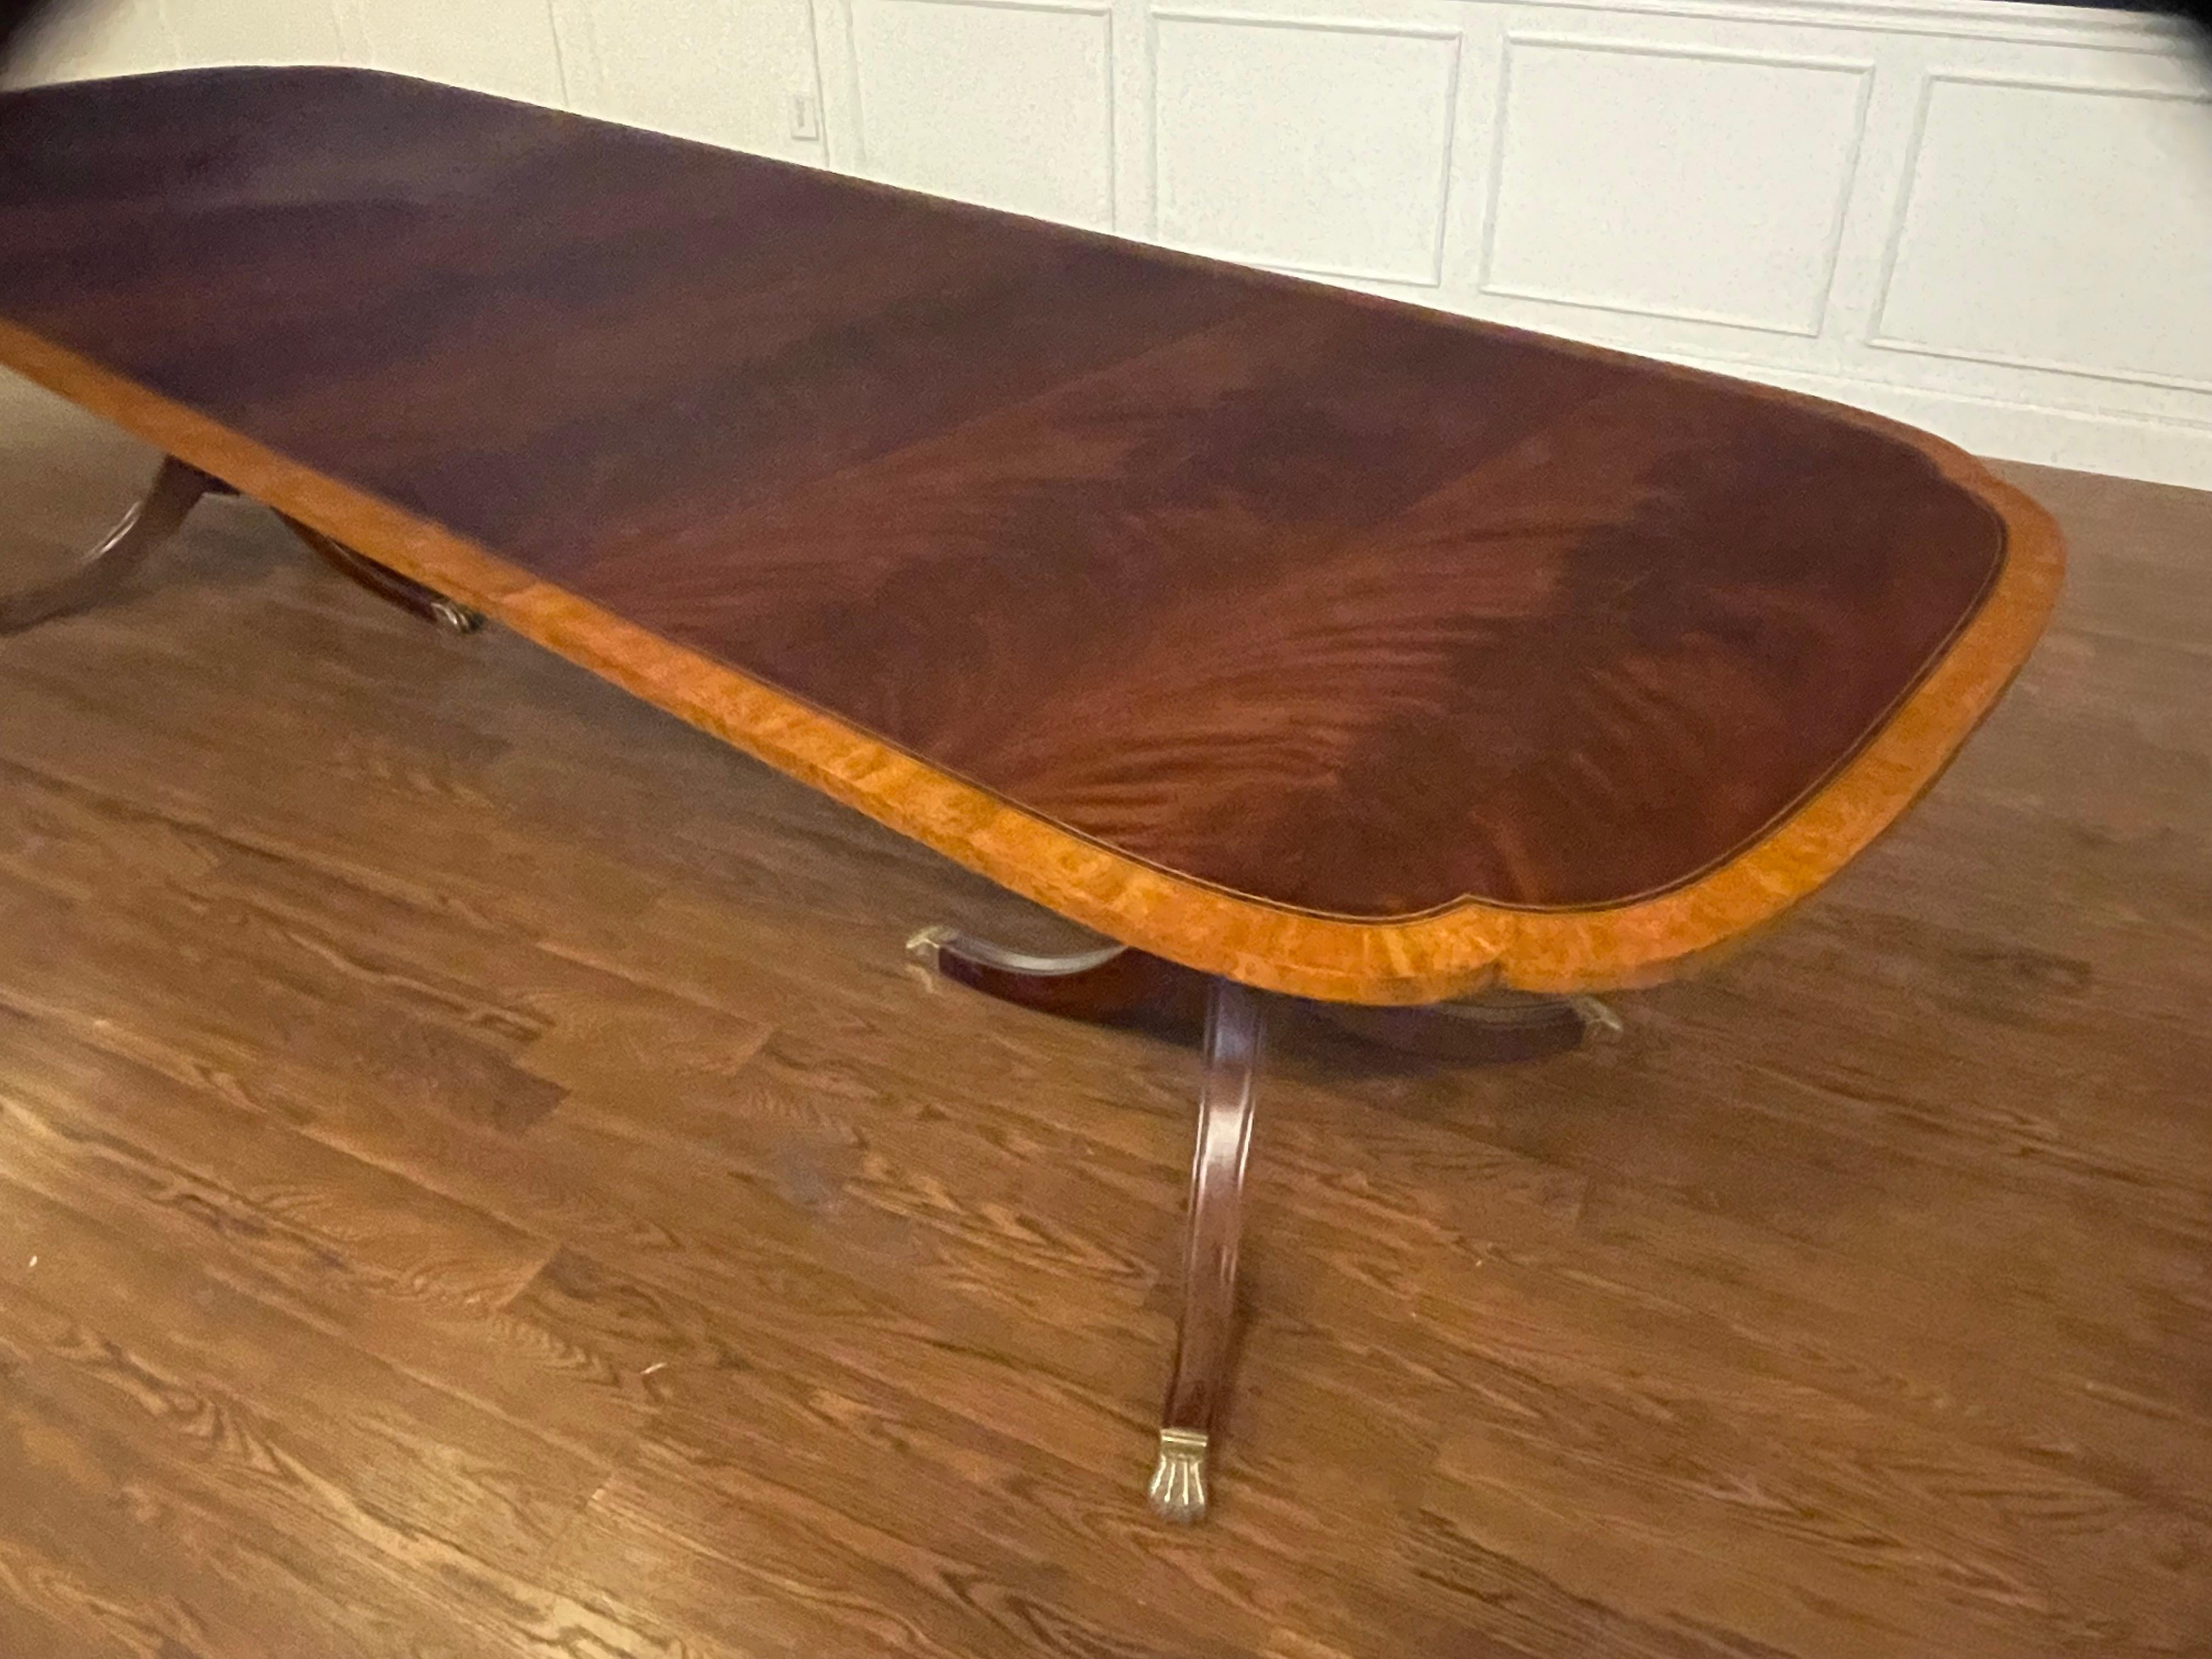 This is our traditional mahogany scallop cornered dining table. The highlight of this table is the elegantly shaped scalloped corners. It features a field of slip-matched swirly crotch mahogany from West Africa and a satinwood border from South